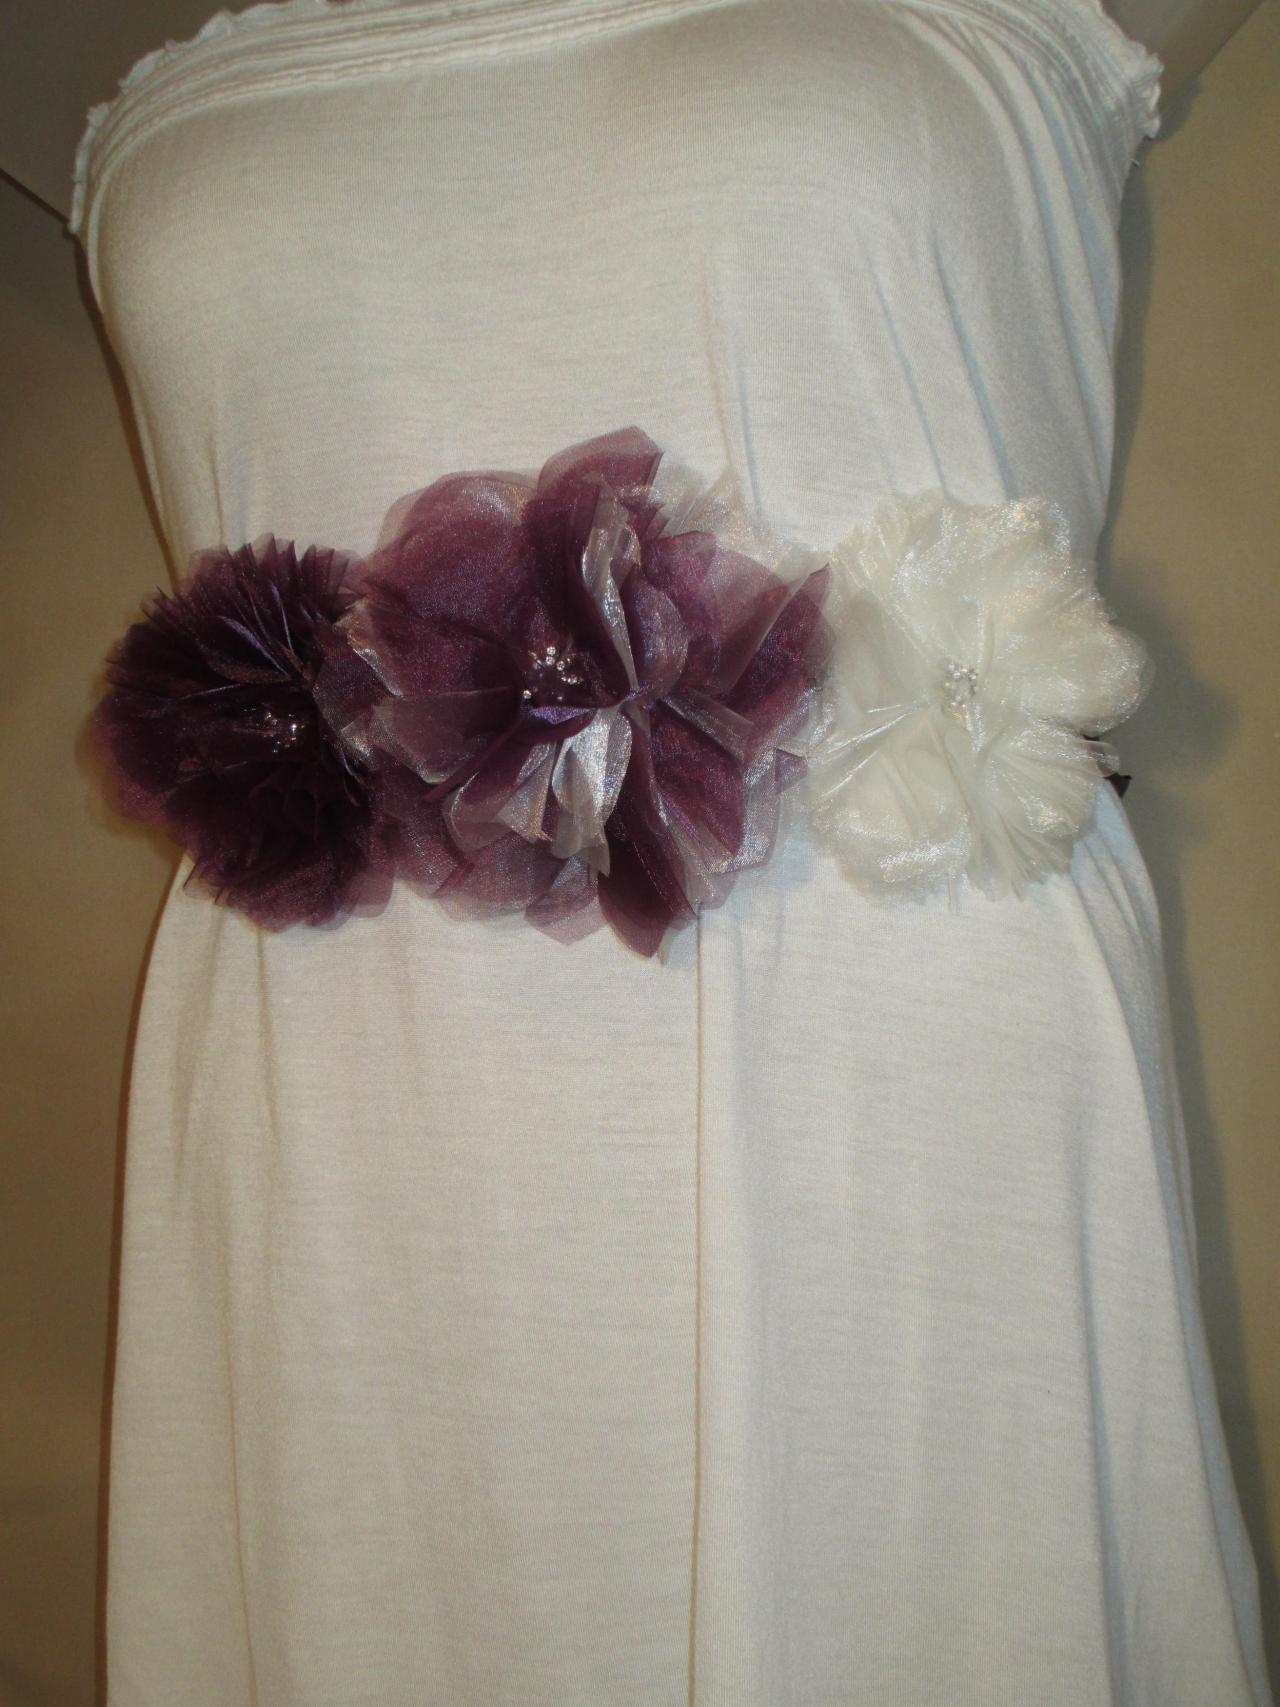 Beautiful Eggplant And Ivory Bridal Sash With 3 Large Handmade Organza Flowers - Handmade In Colorado